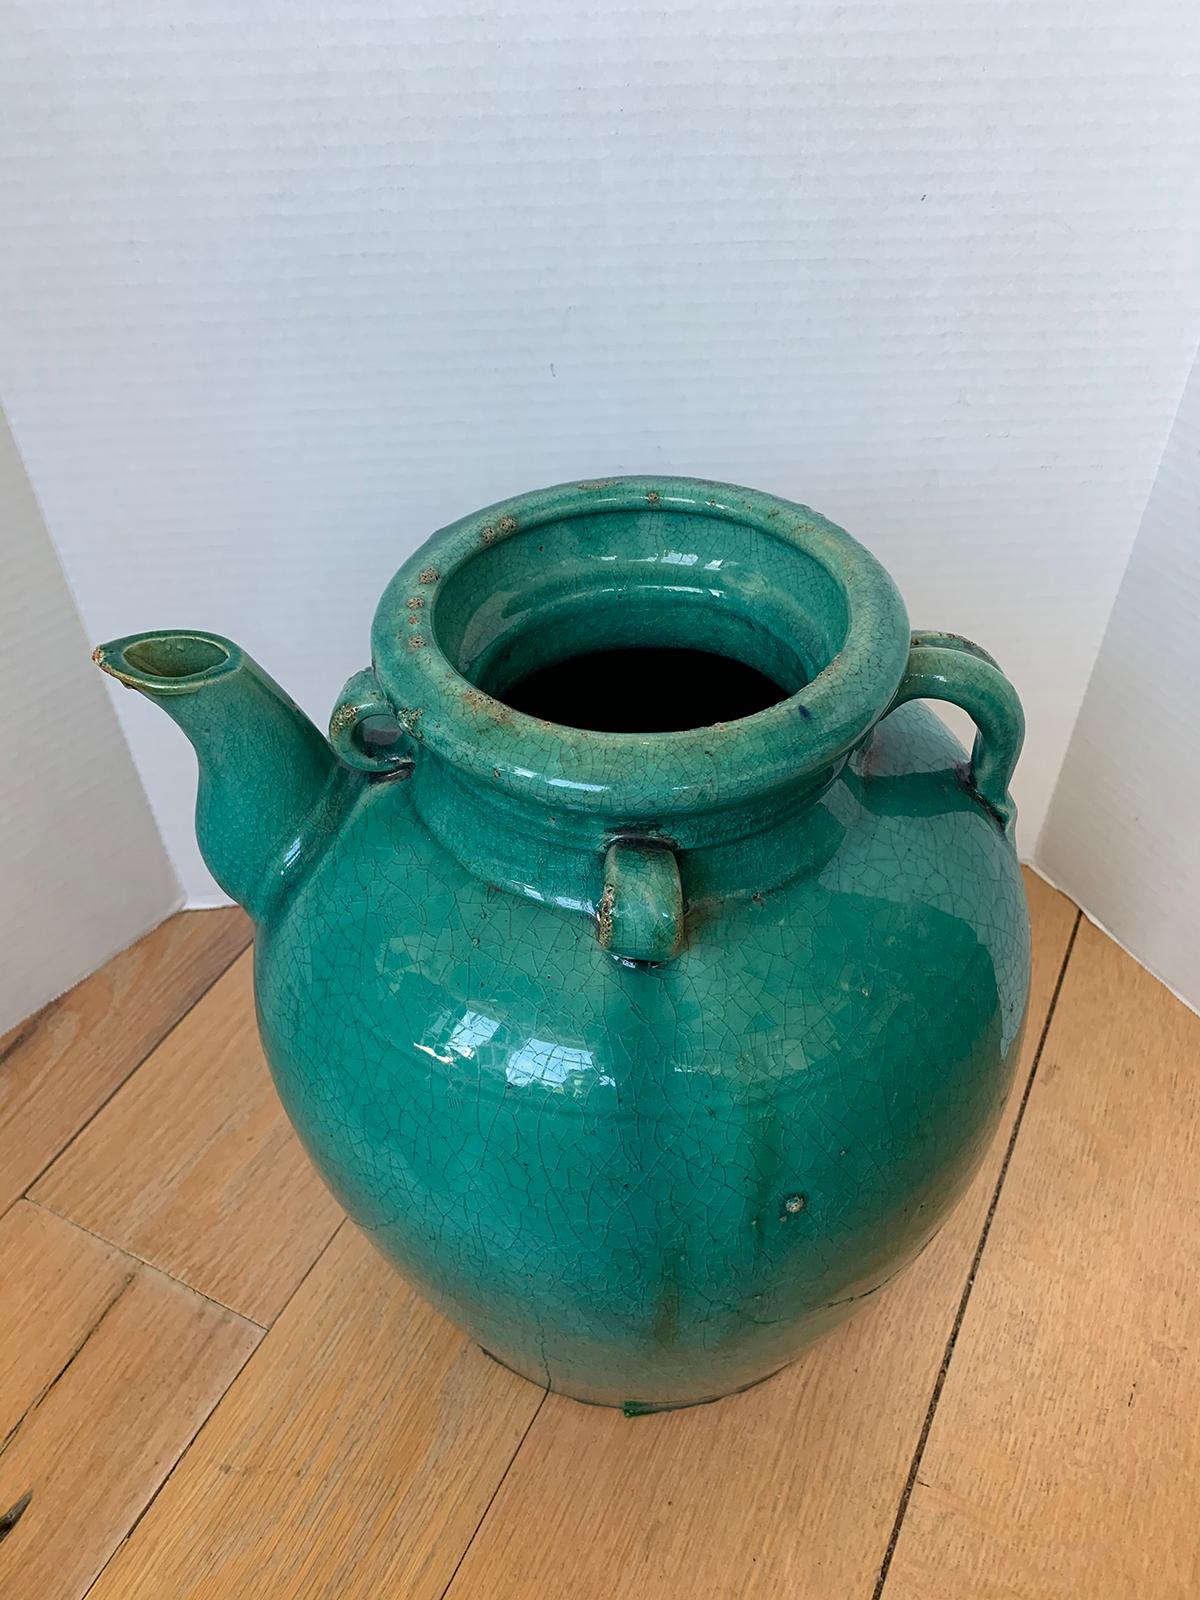 turquoise glaze on pottery from 100-200 ad